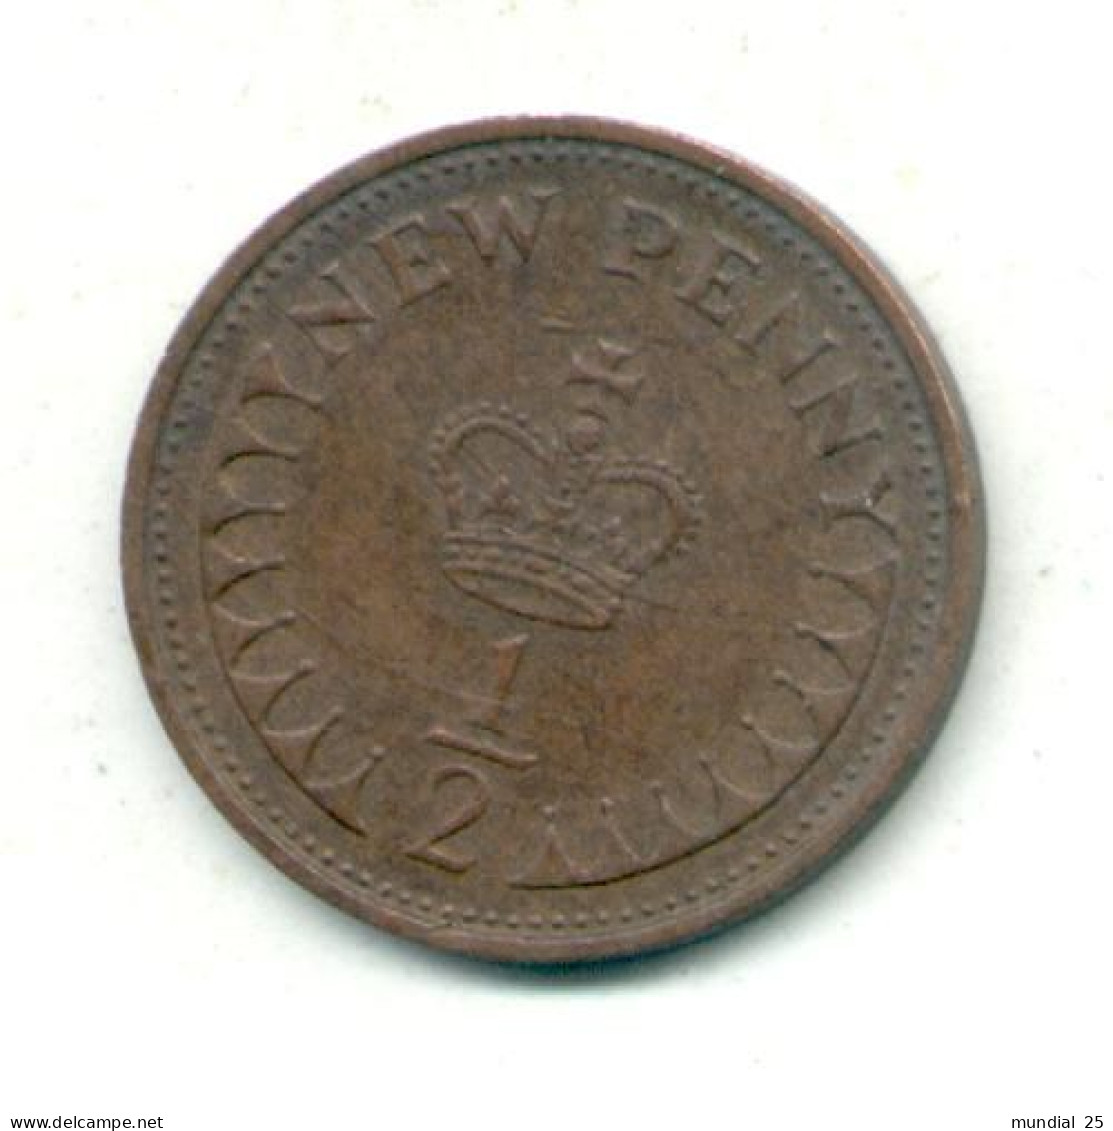 GREAT BRITAIN 1/2 NEW PENNY 1971 - 1/2 Penny & 1/2 New Penny